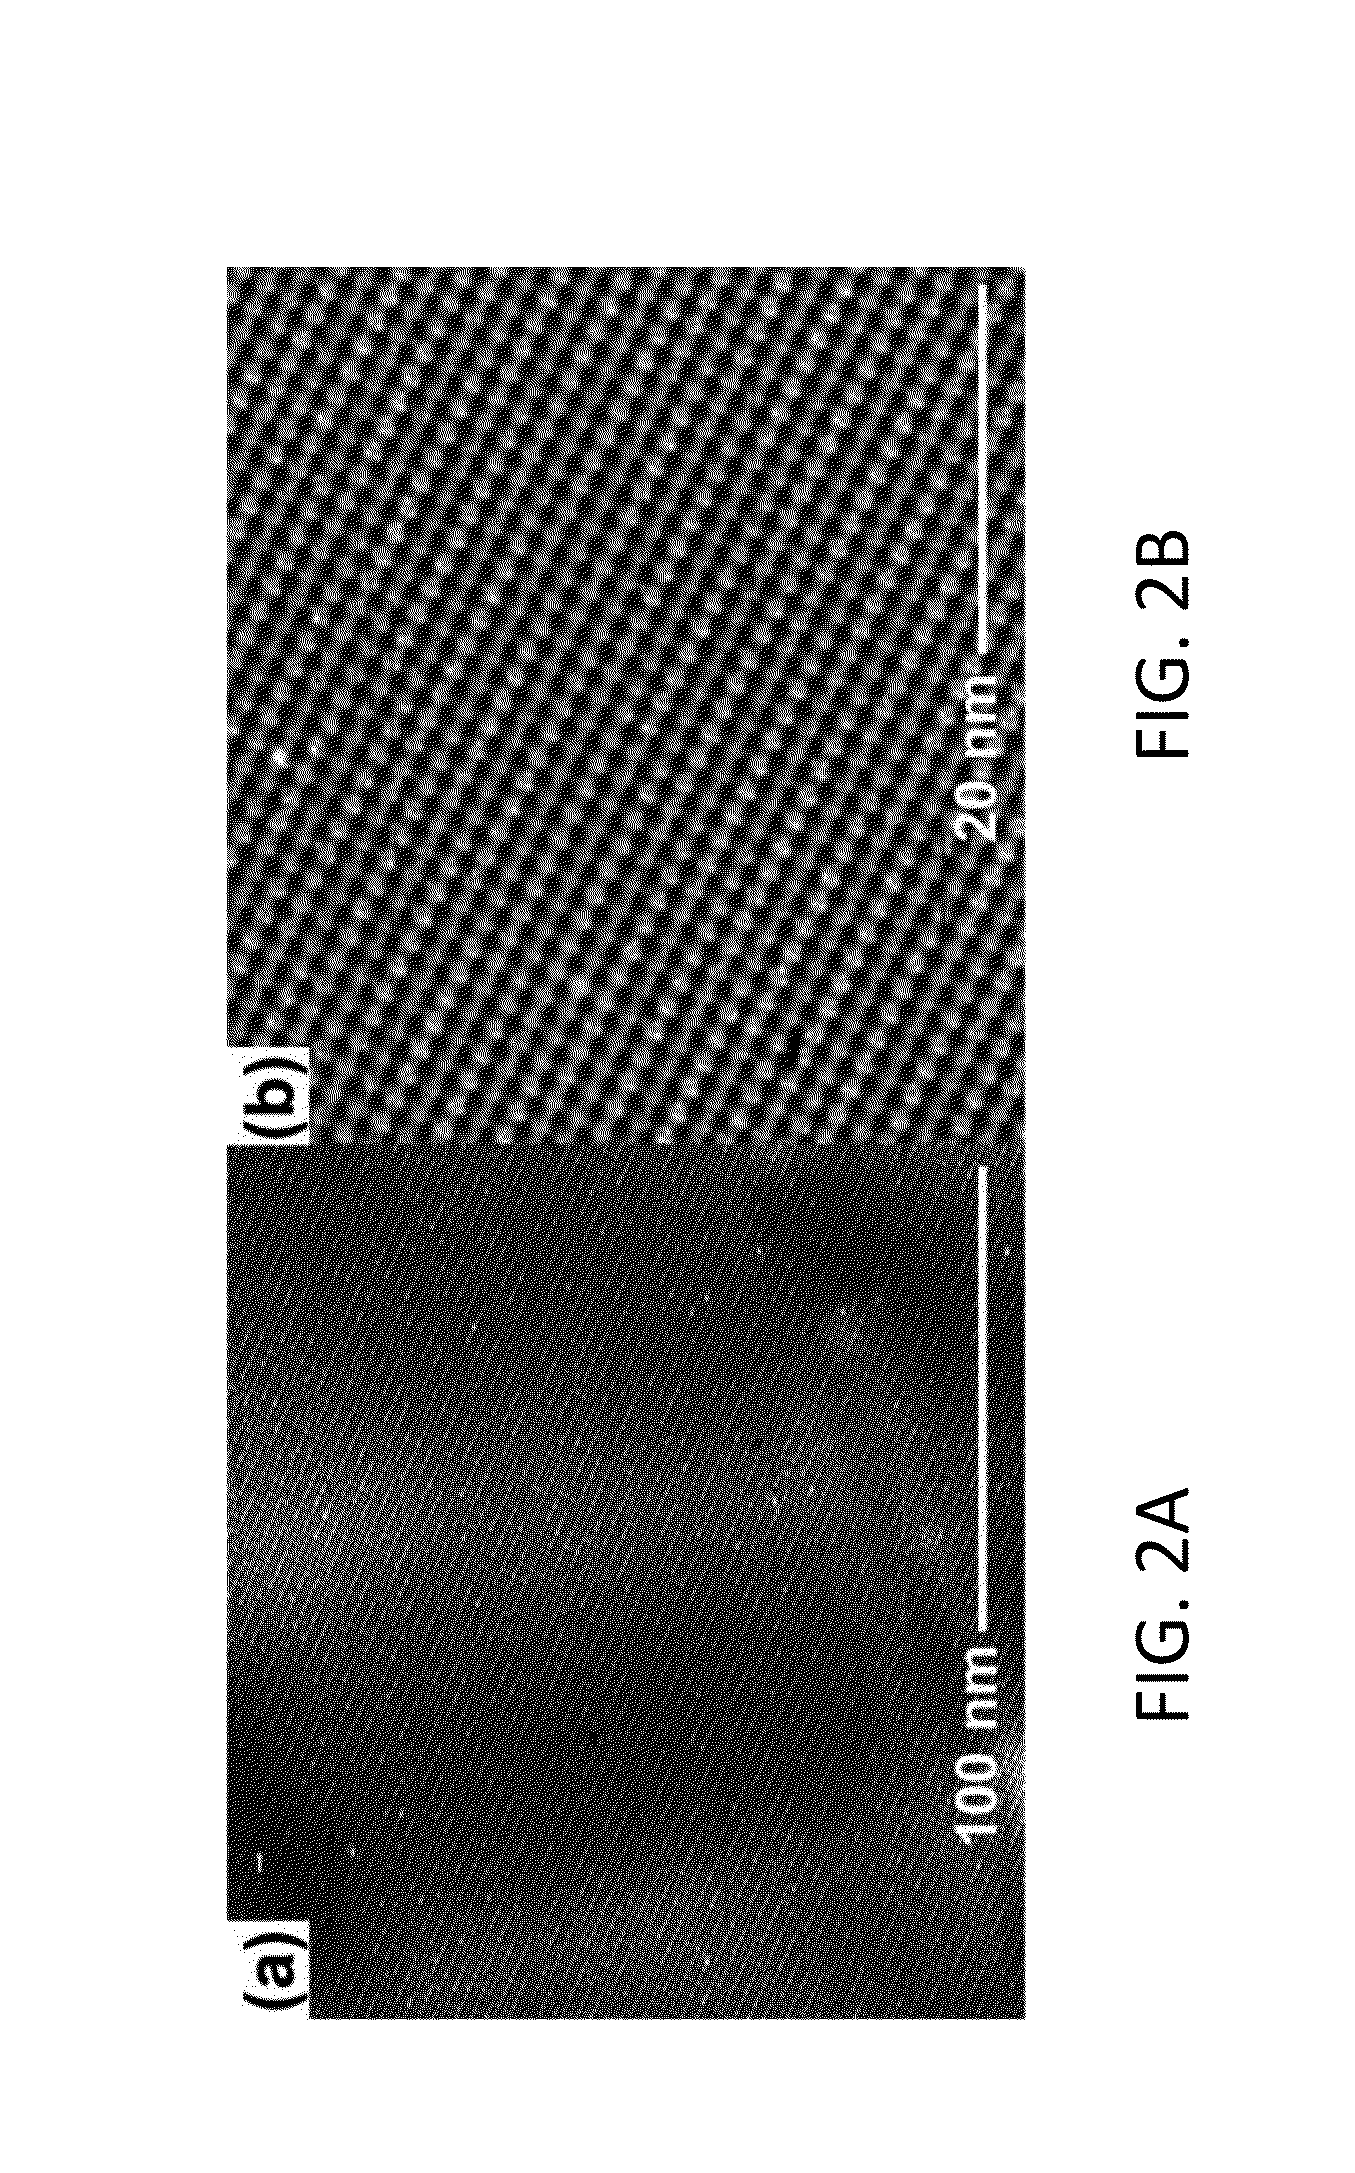 Method for passivating surfaces, functionalizing inert surfaces, layers and devices including same